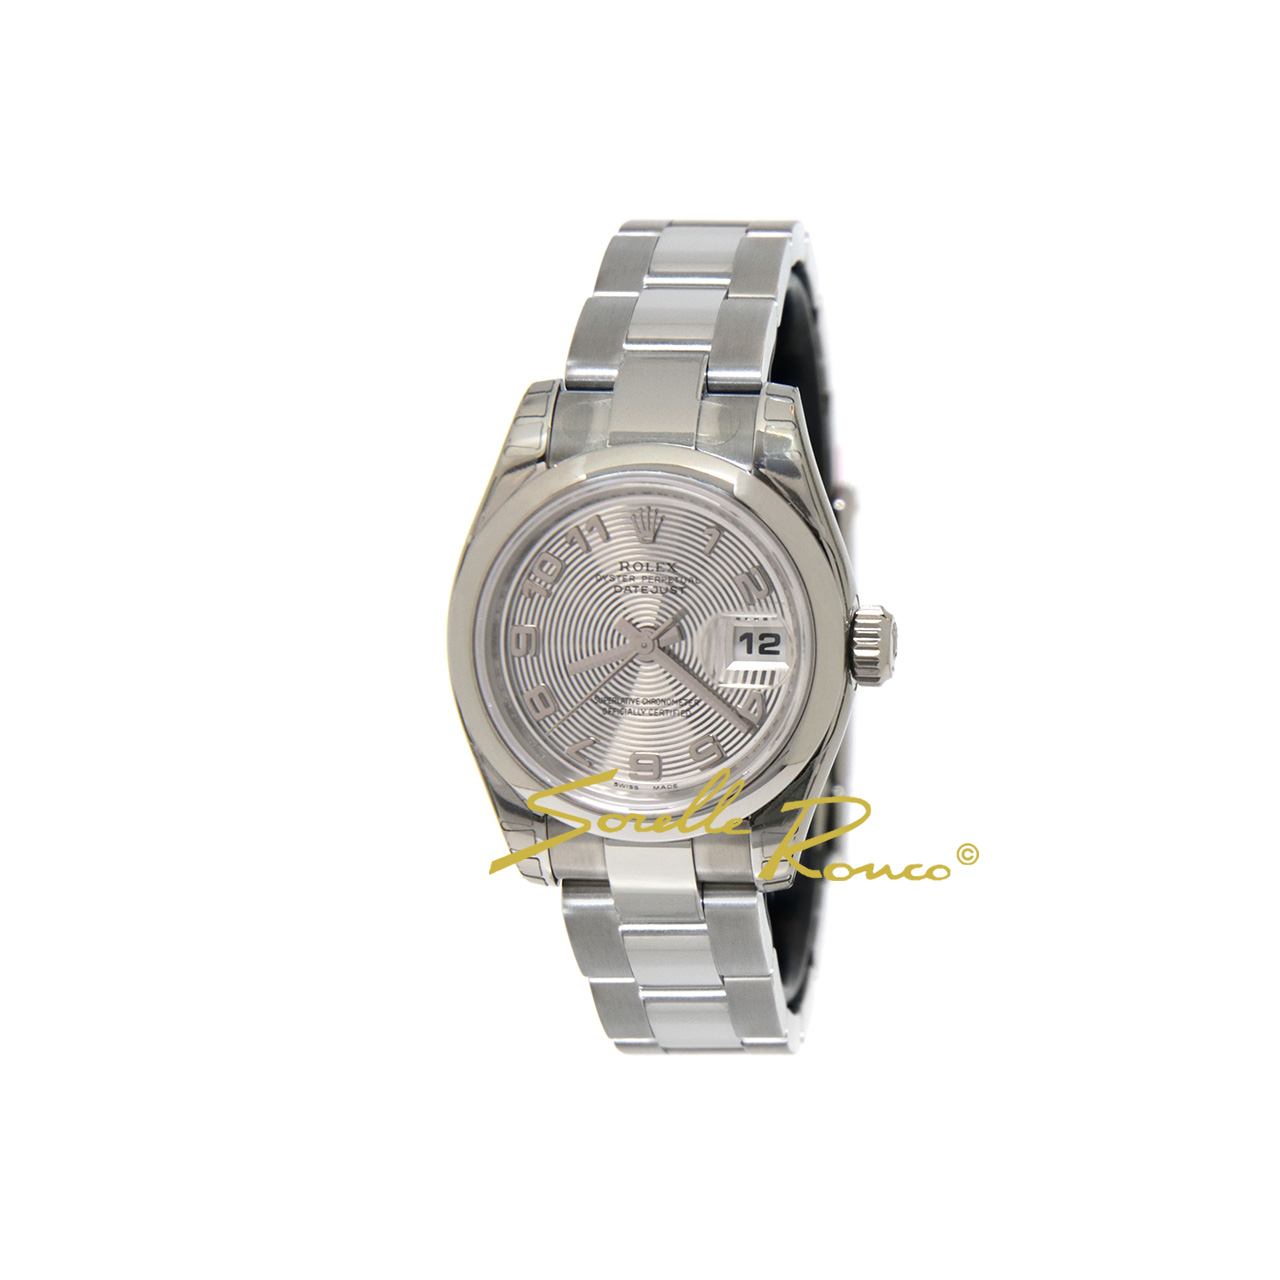 Lady Datejust 26mm Oyster Argento